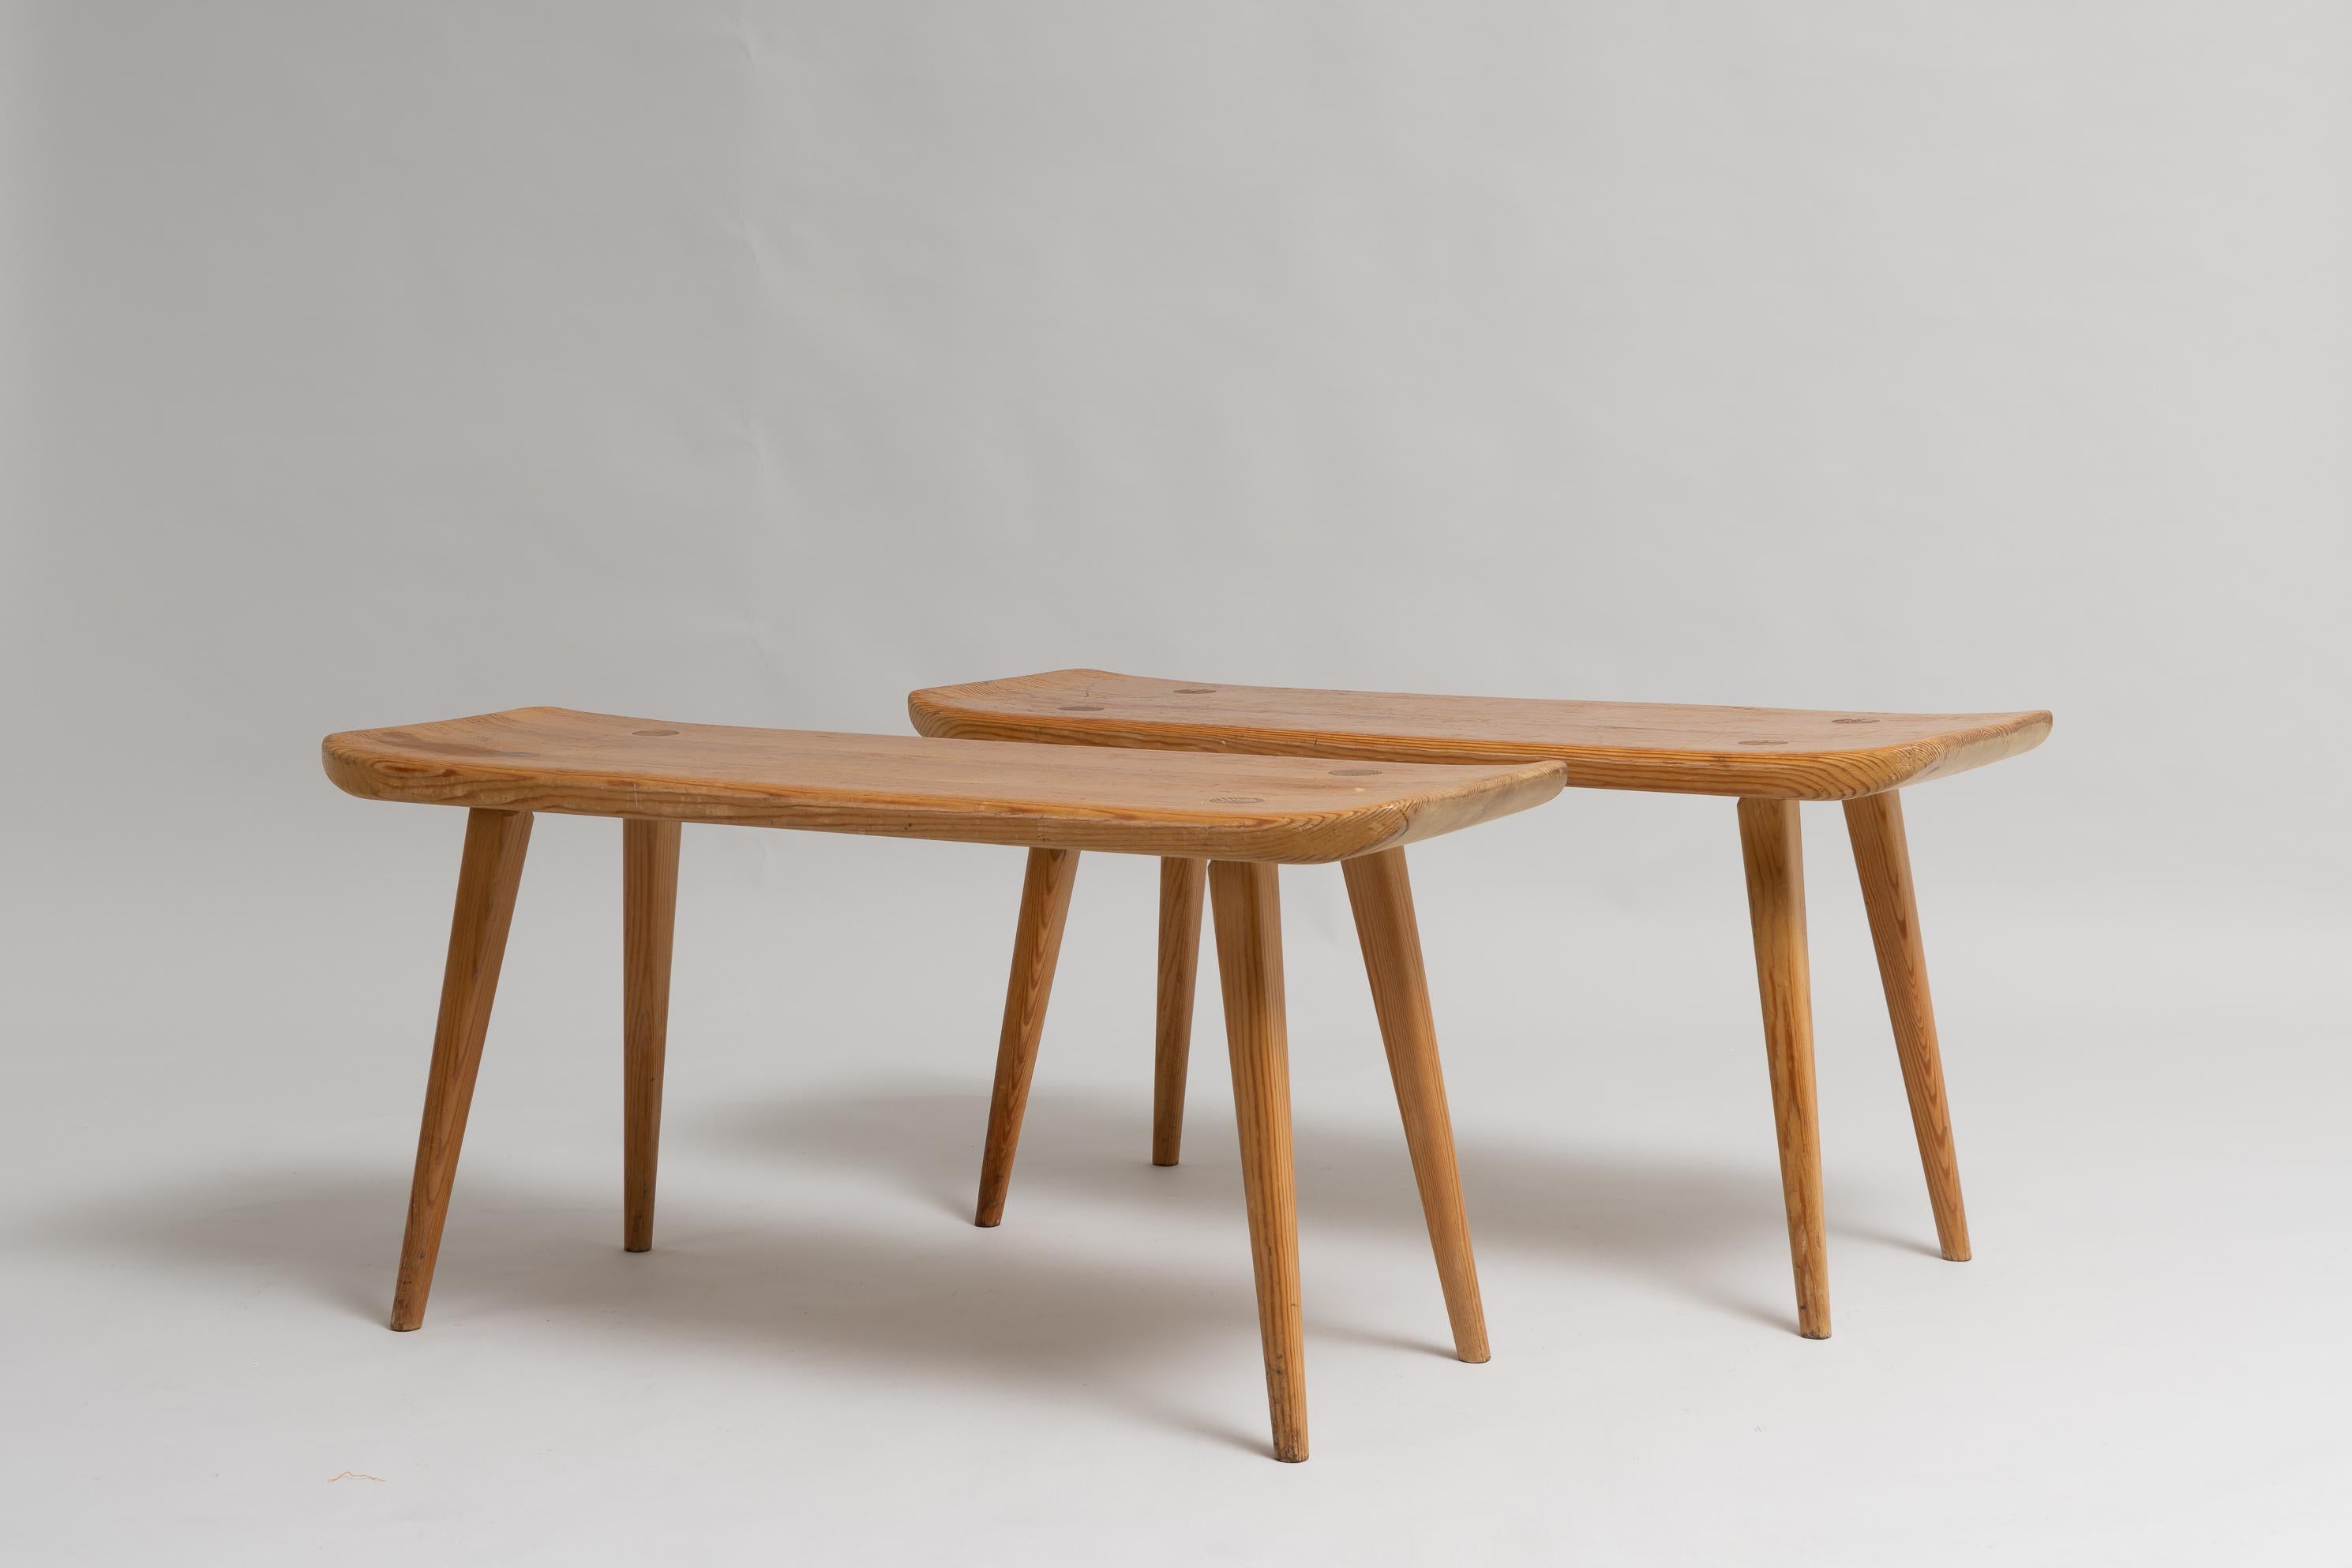 Set of 2 stools Visingsö by Carl Malmsten för Svensk fur. The stools are solid pine with beautifully curved characteristic edges. Designed in 1953. This pair is from around 1965 and are branded underneath the seat. Good vintage condition consistent